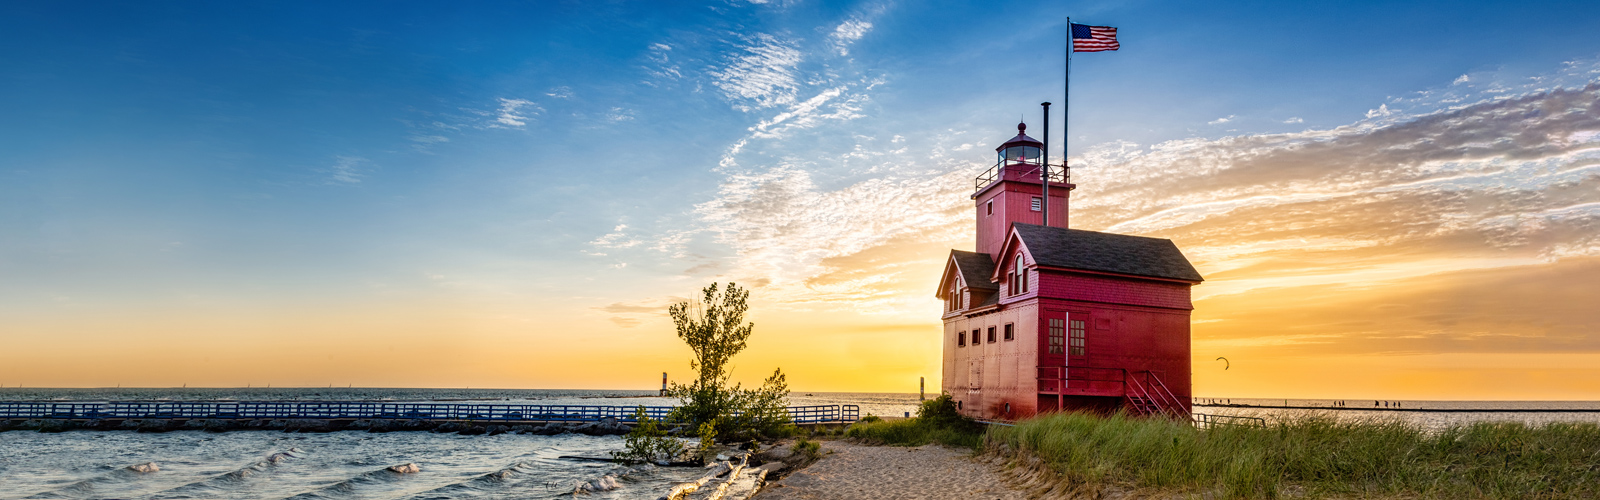 Big red lighthouse in Holland Michigan